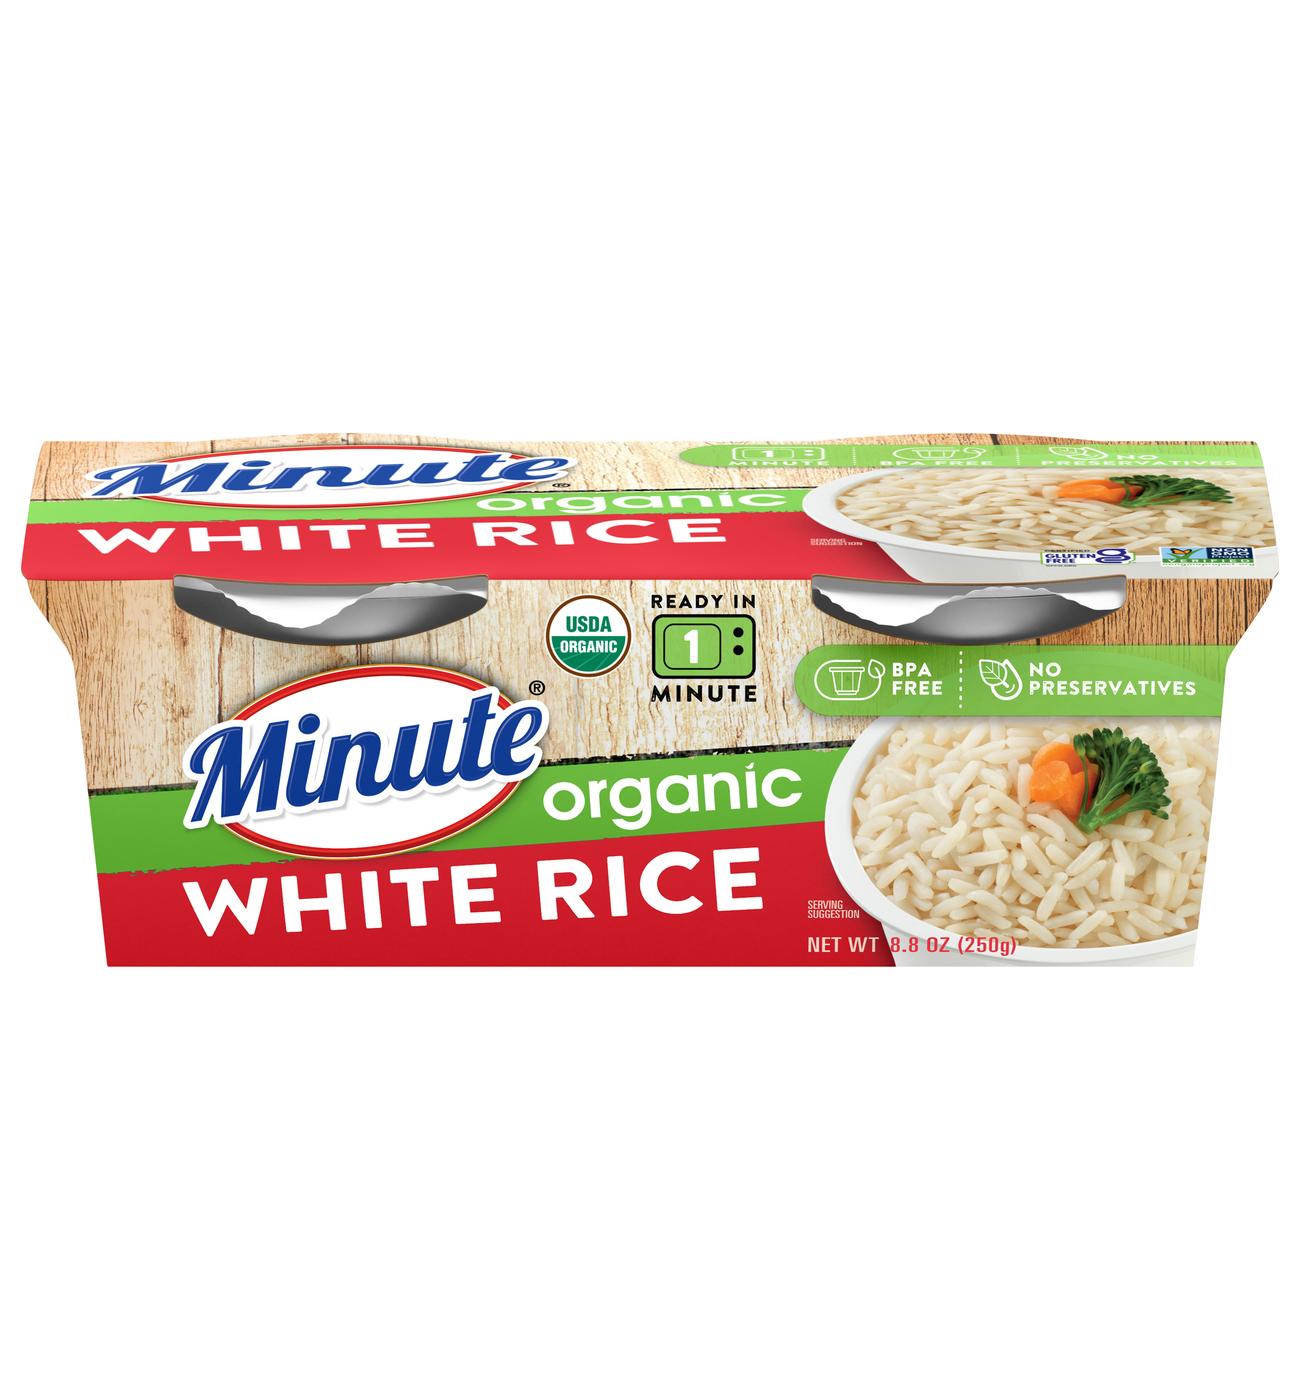 Minute Ready to Serve Organic White Rice - Shop Rice & Grains at H-E-B